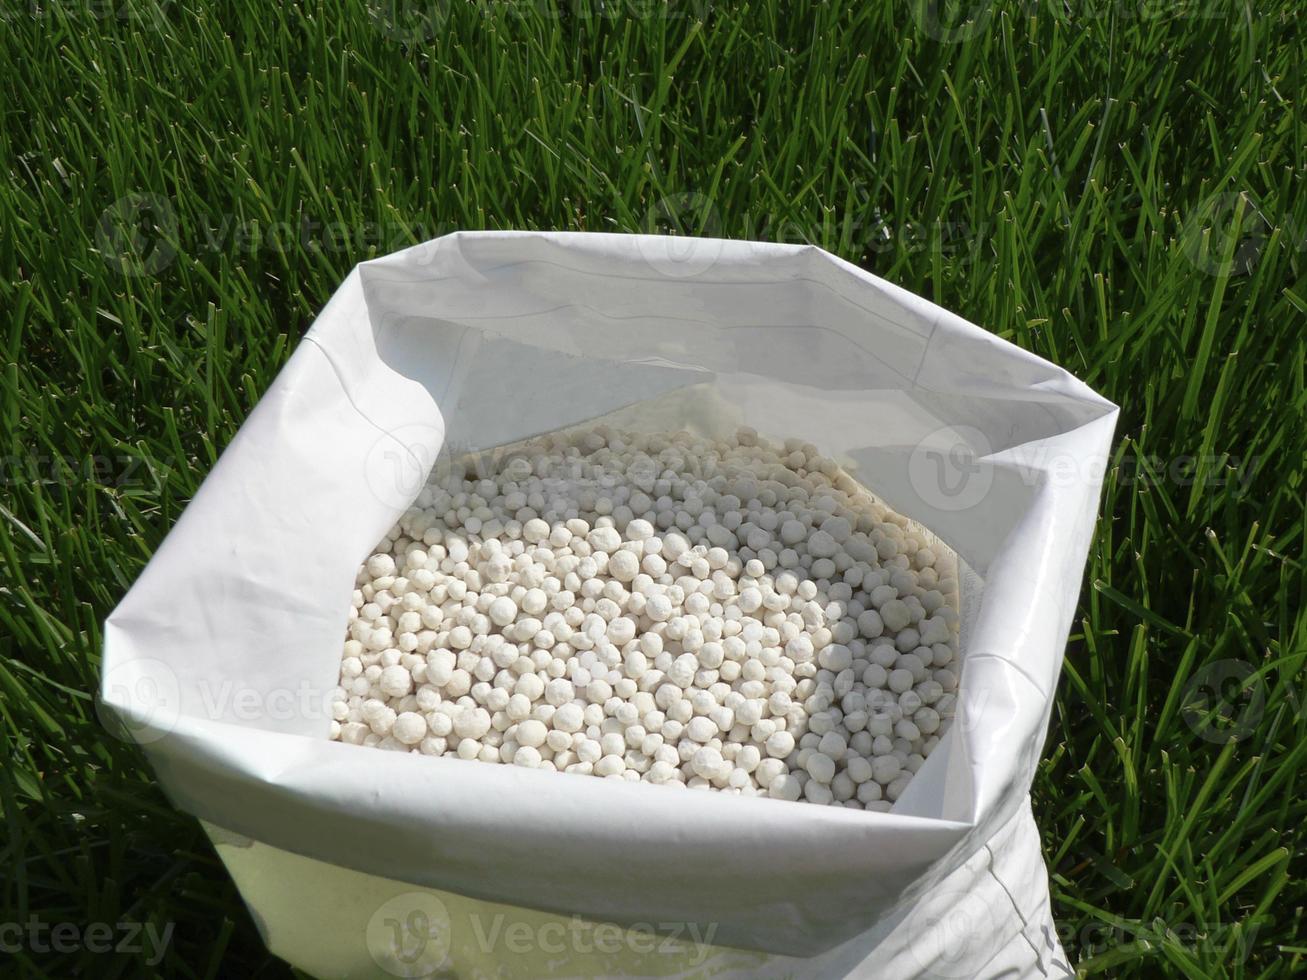 Fertilizer for grass, lawn, meadow in a bag of white granules on a background of green grass. Close up of mineral fertilizer granules used on grass lawns and gardens to maintain health and growth. photo